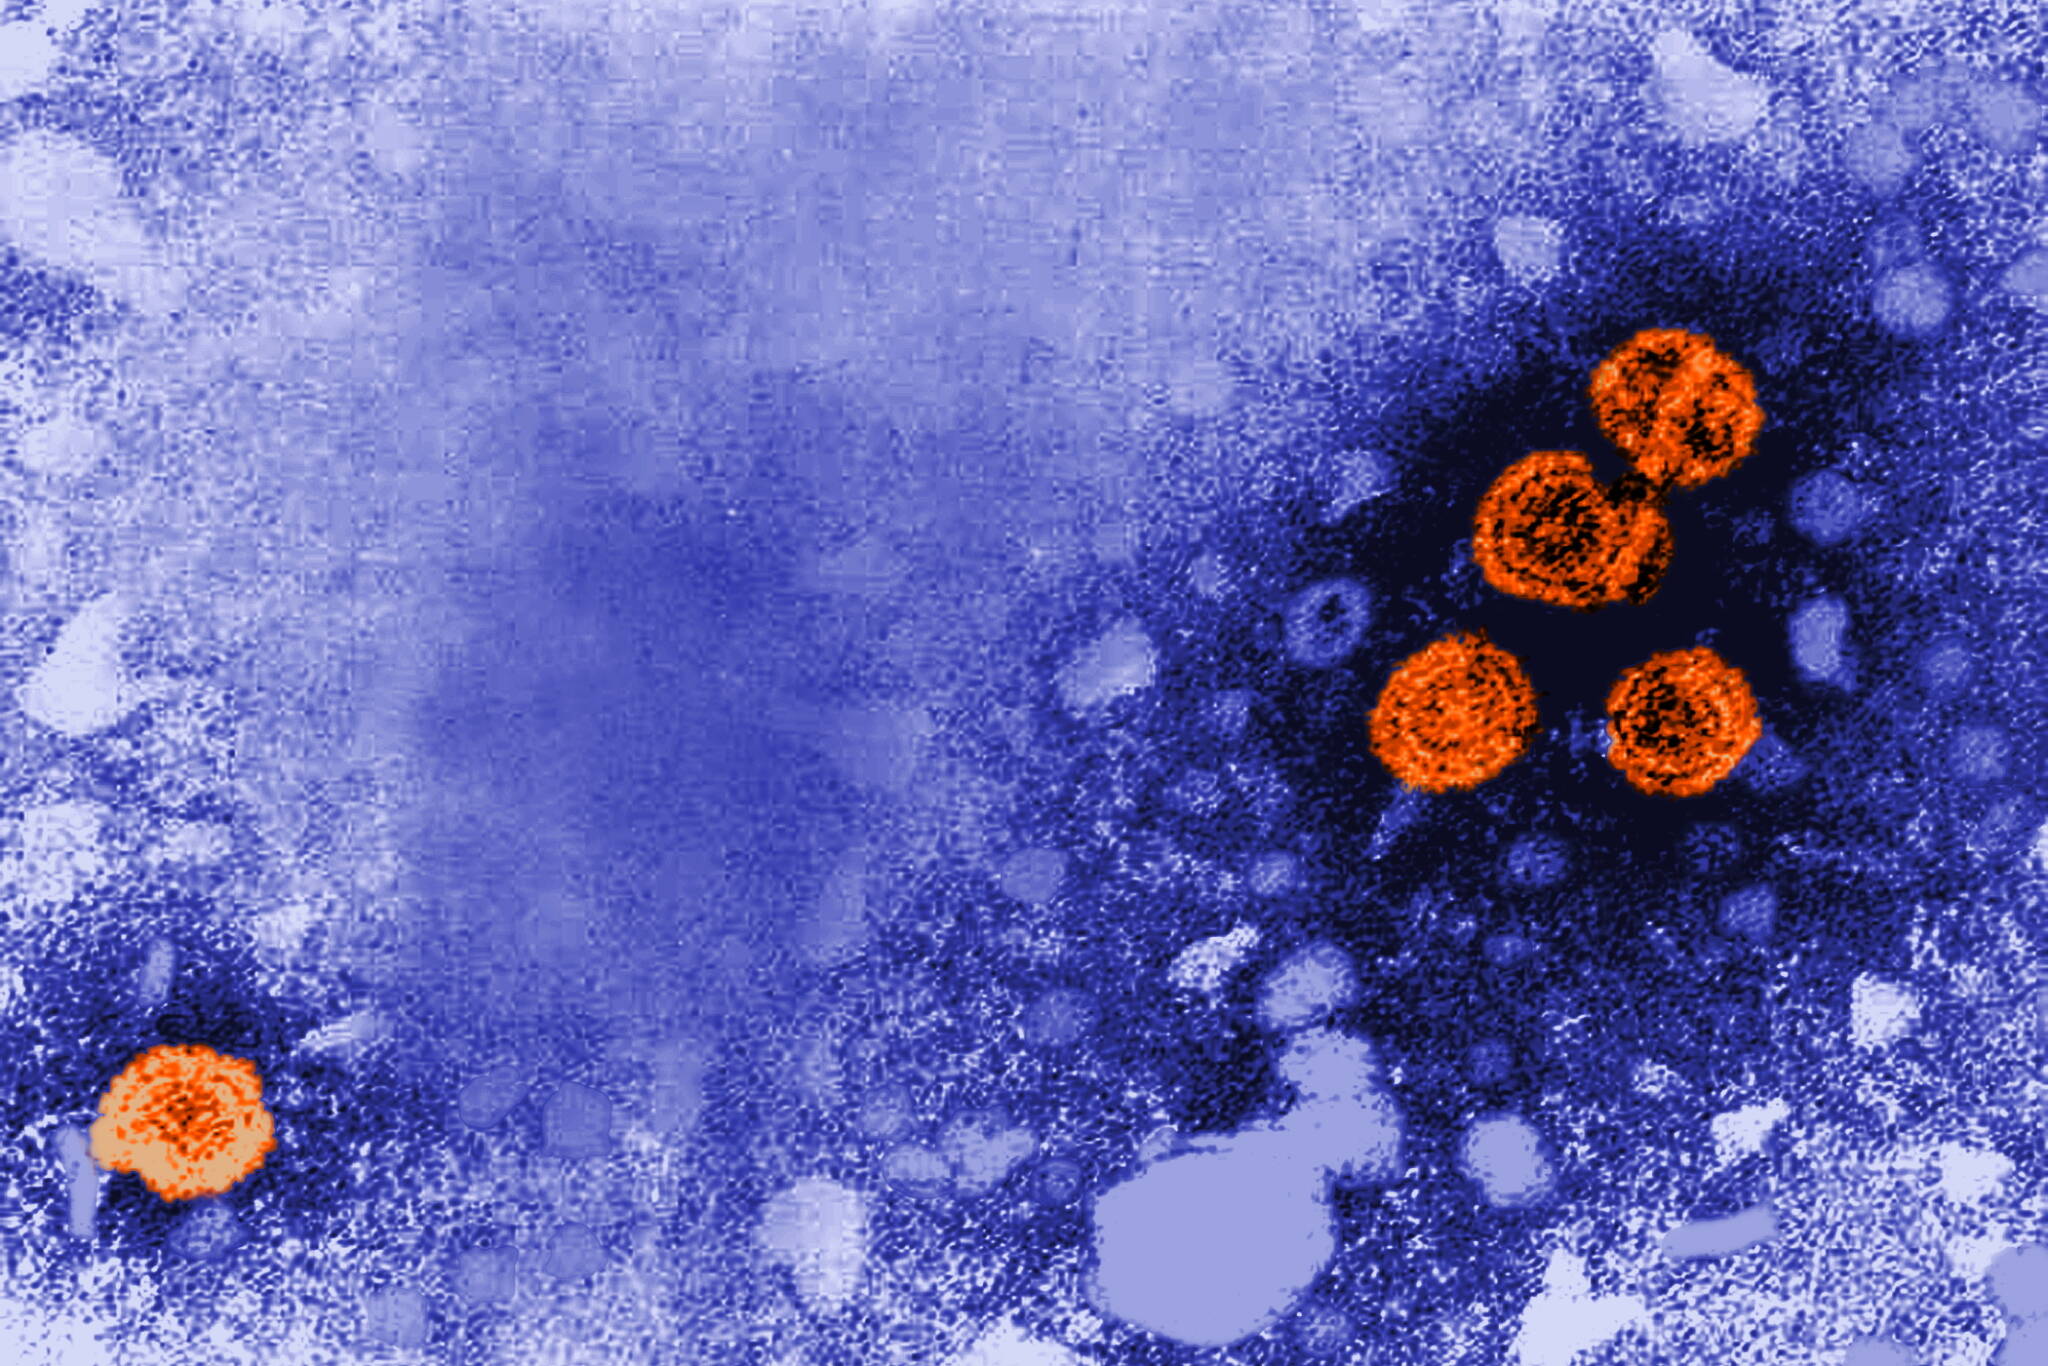 Hepatitis B virus particles, in orange, are seen in this microscopic image captured in 1981. Since so many people are unaware that they are infected, state health officials recommend stepped-up screening. (Photo by Dr. Erskin Palmer/U.S. Centers for Disease Control and Prevention)